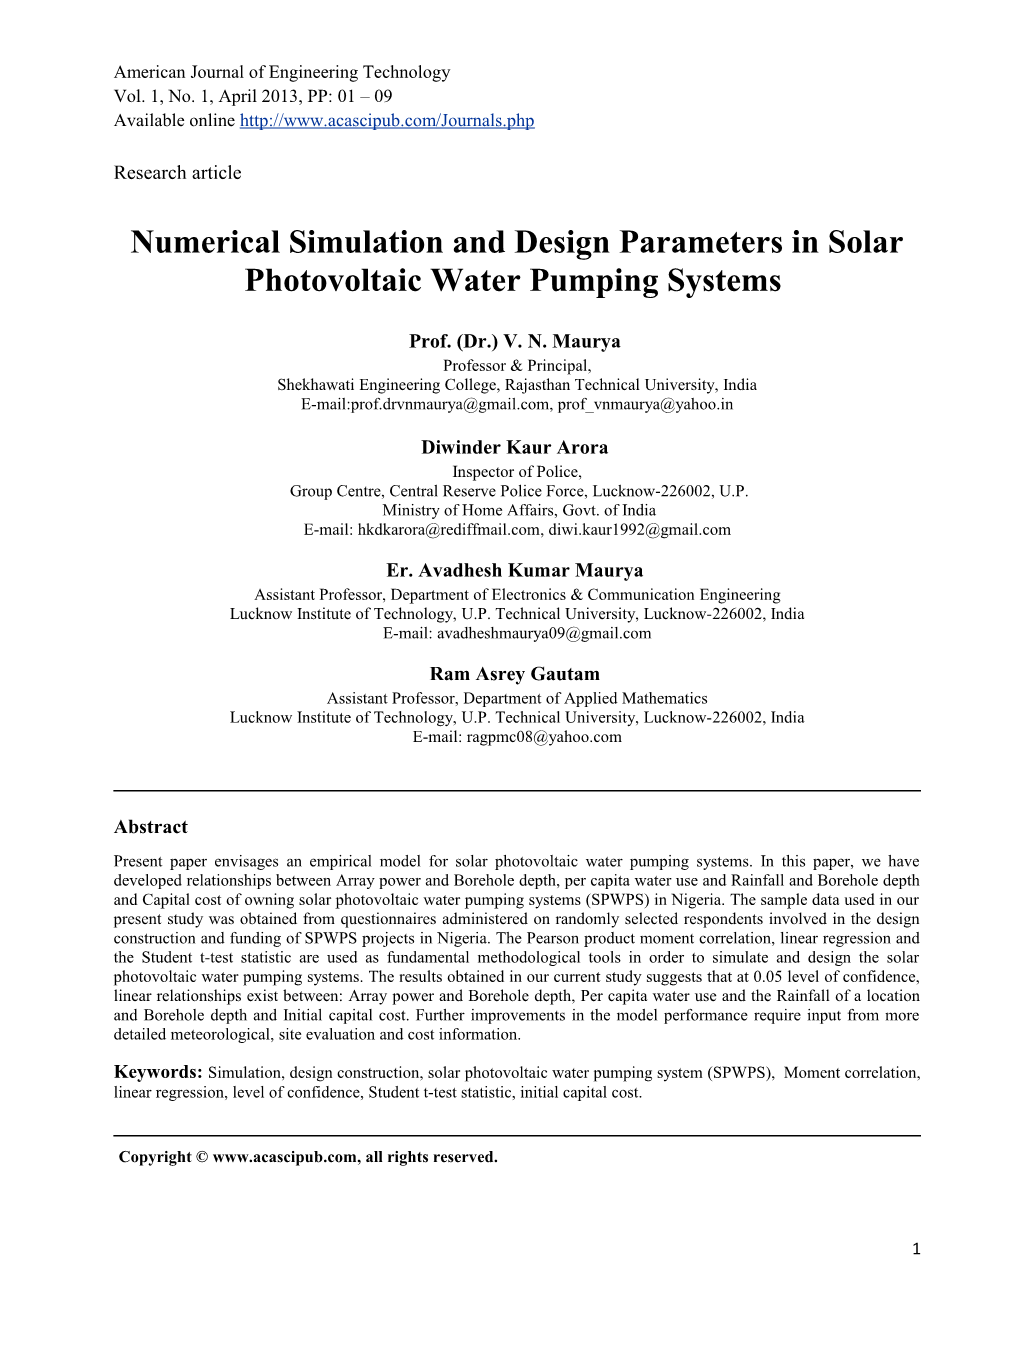 Numerical Simulation and Design Parameters in Solar Photovoltaic Water Pumping Systems